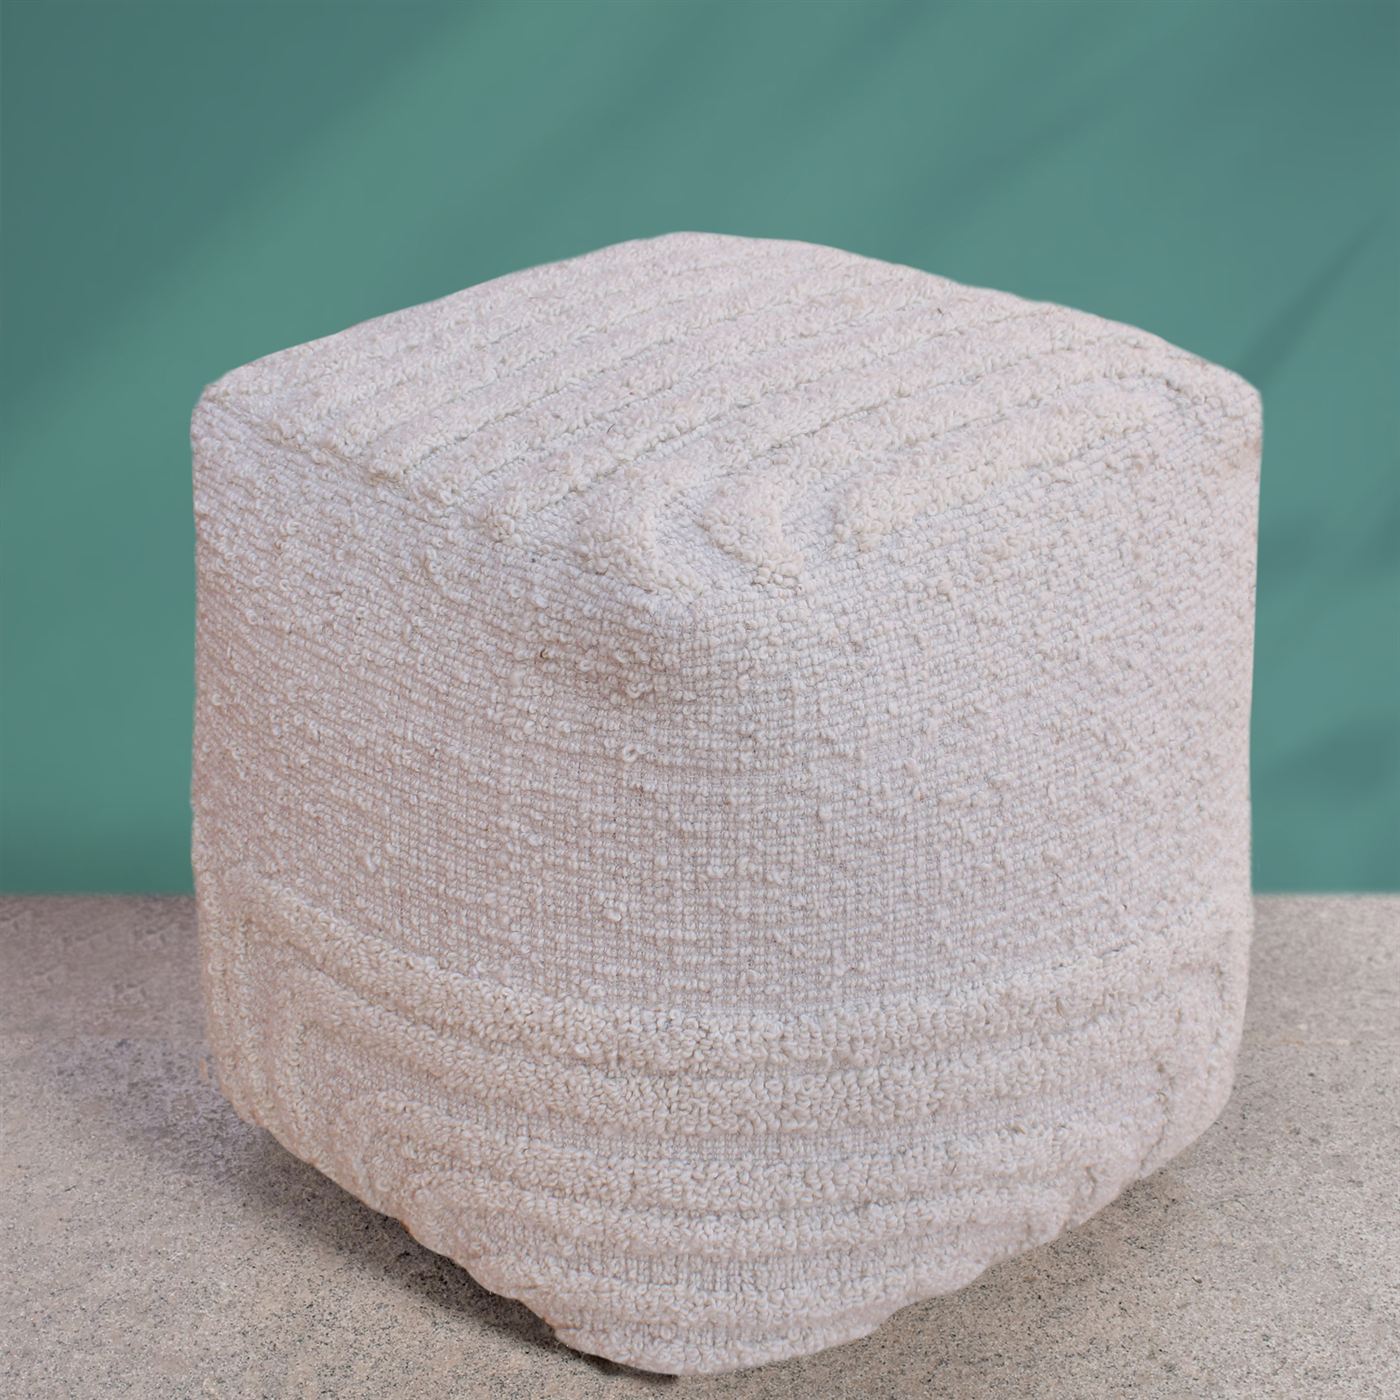 Debren Pouf, Wool, Natural White, Hand woven, All Loop